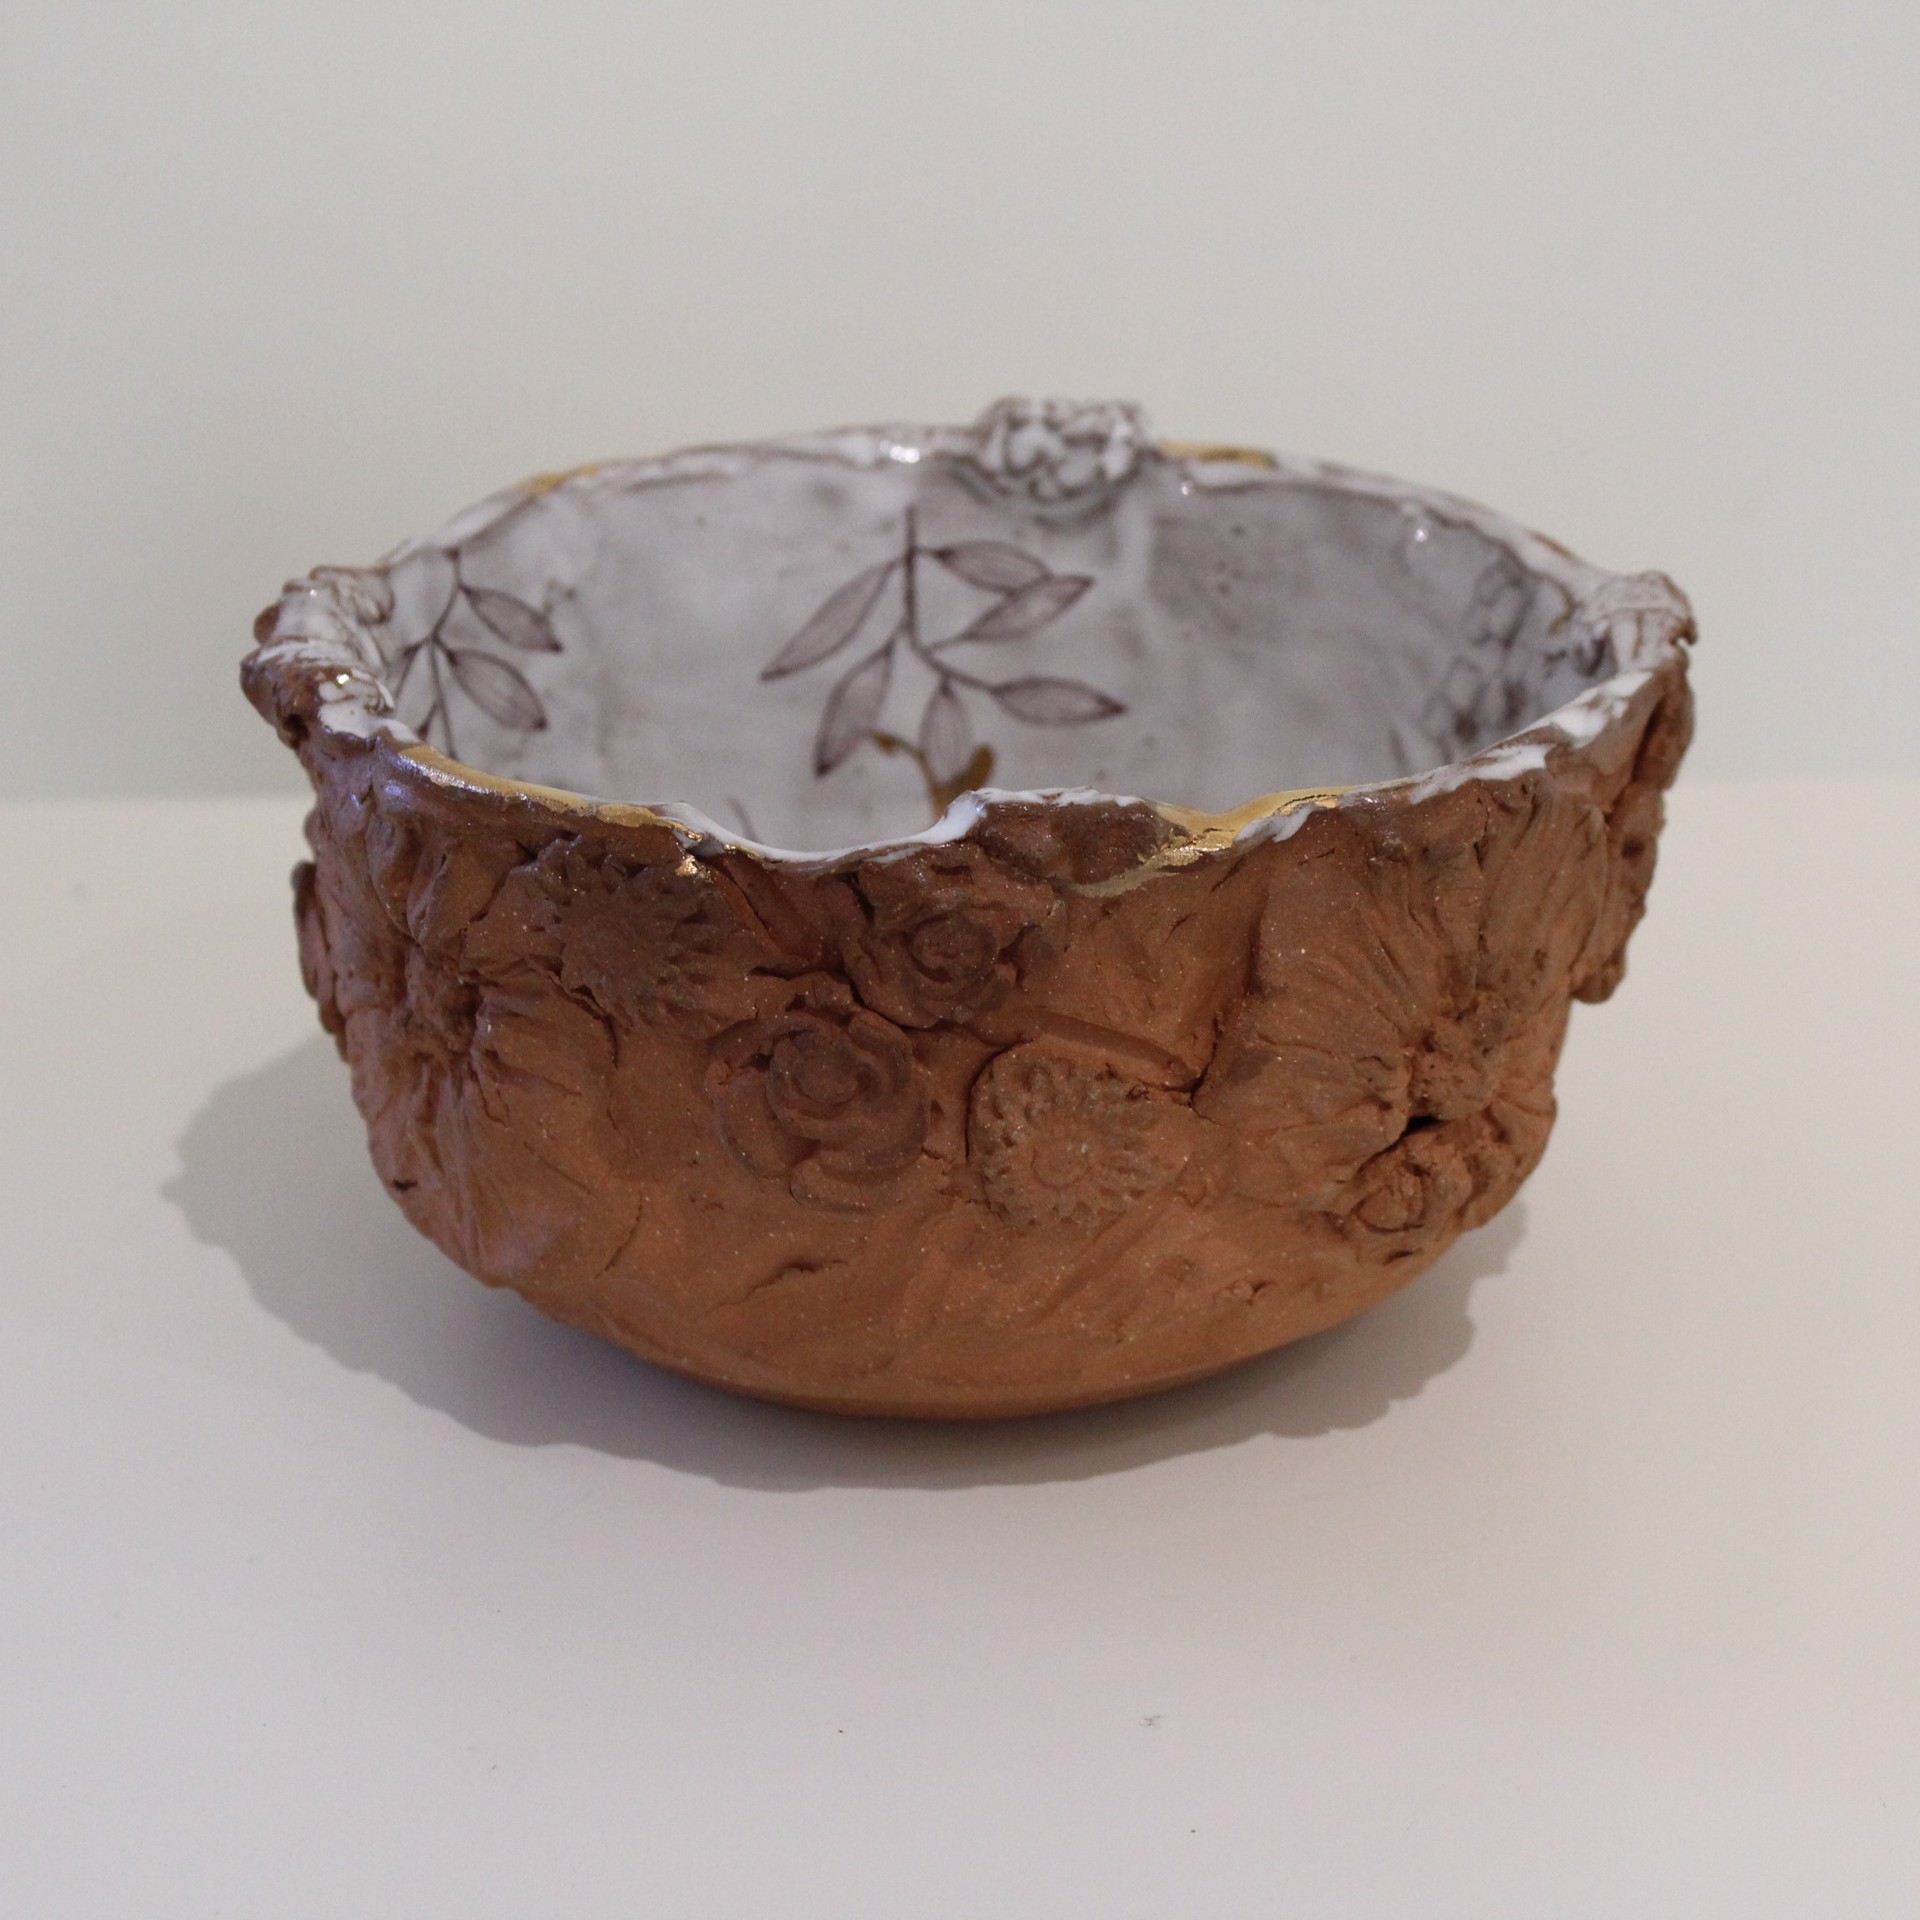 Small Carved Bowl by Therese Knowles